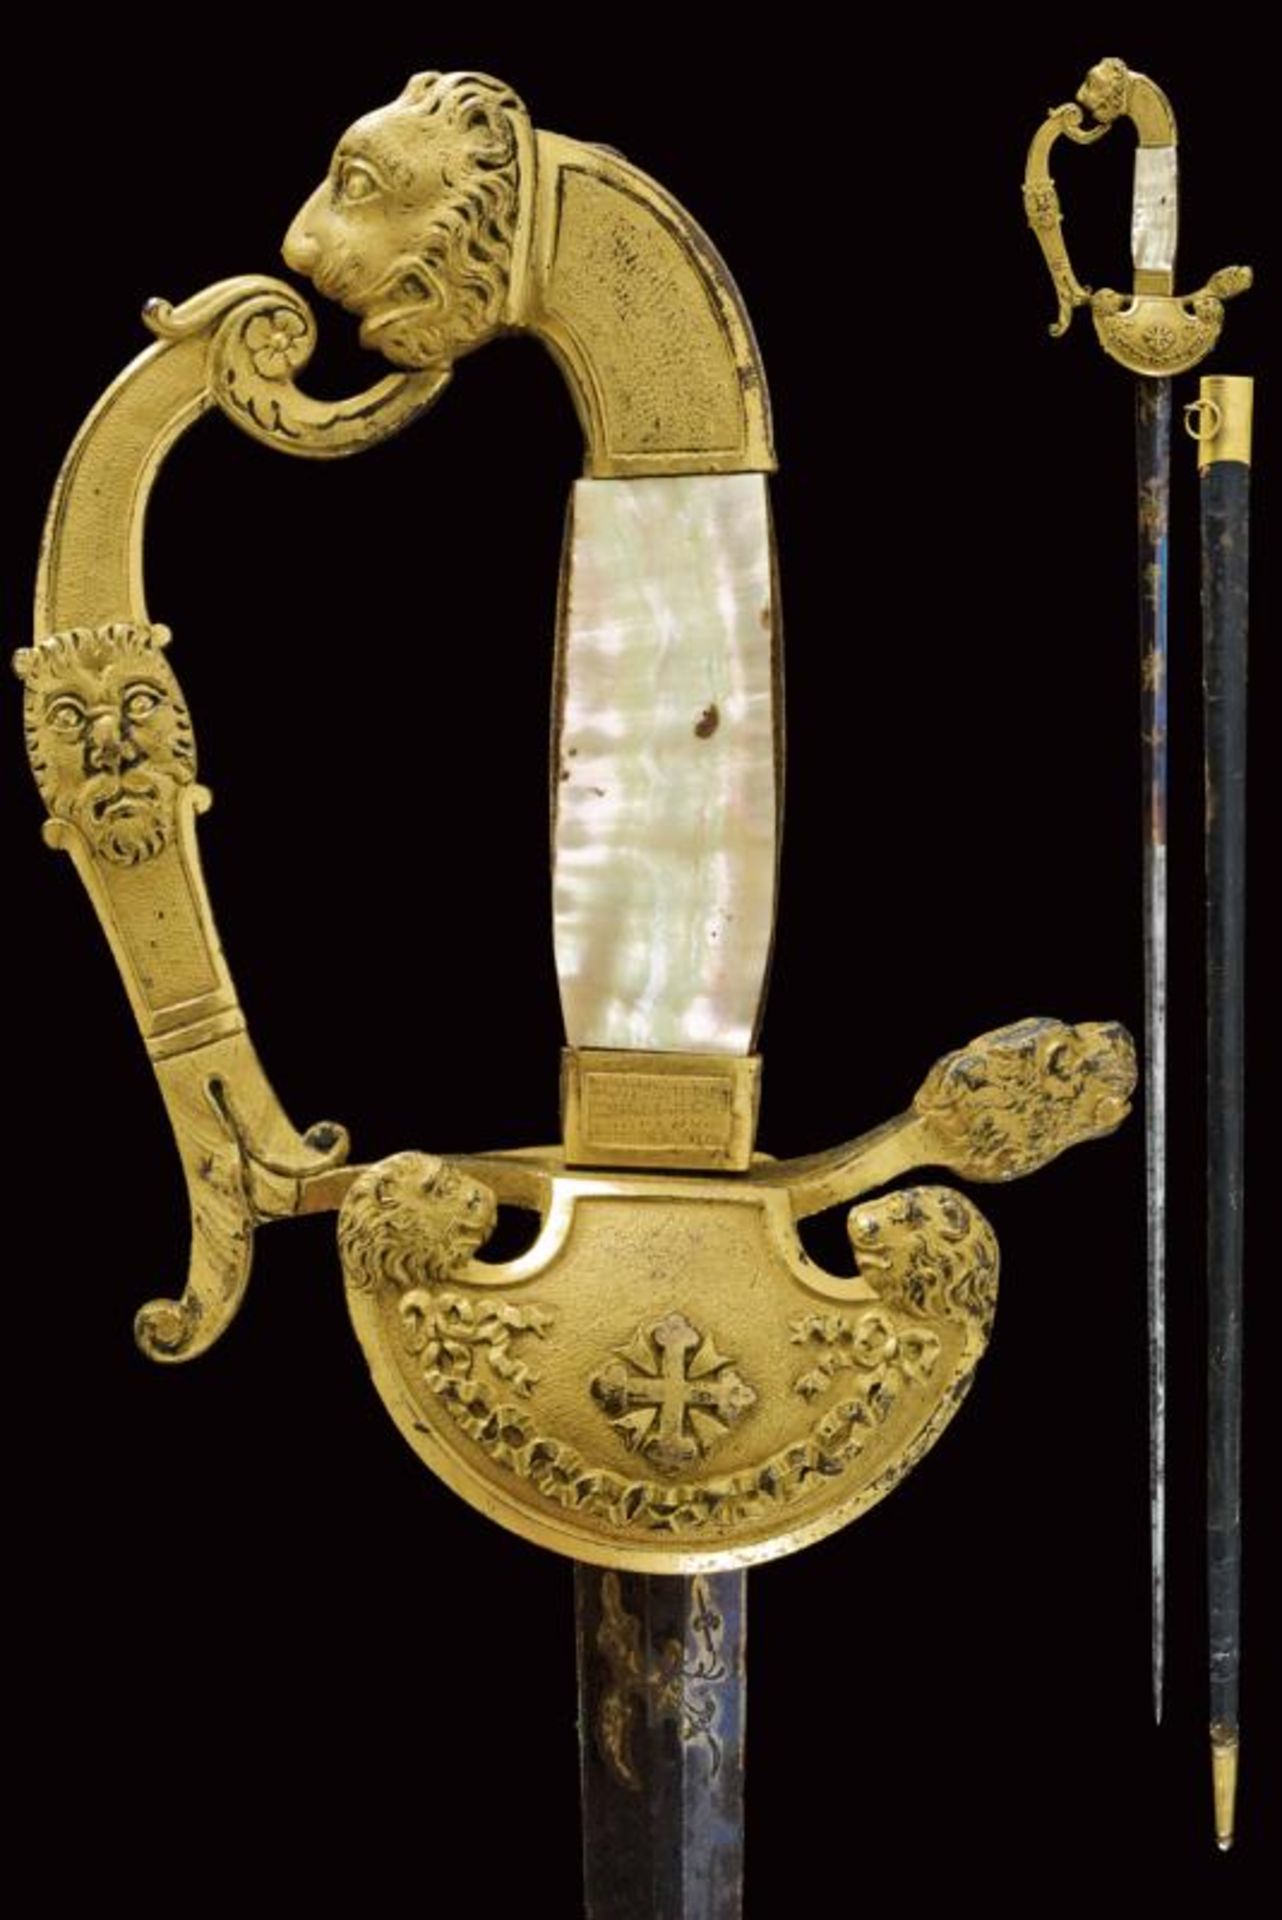 A scarce small sword for commanders of the Order of Saints Maurice and Lazarus